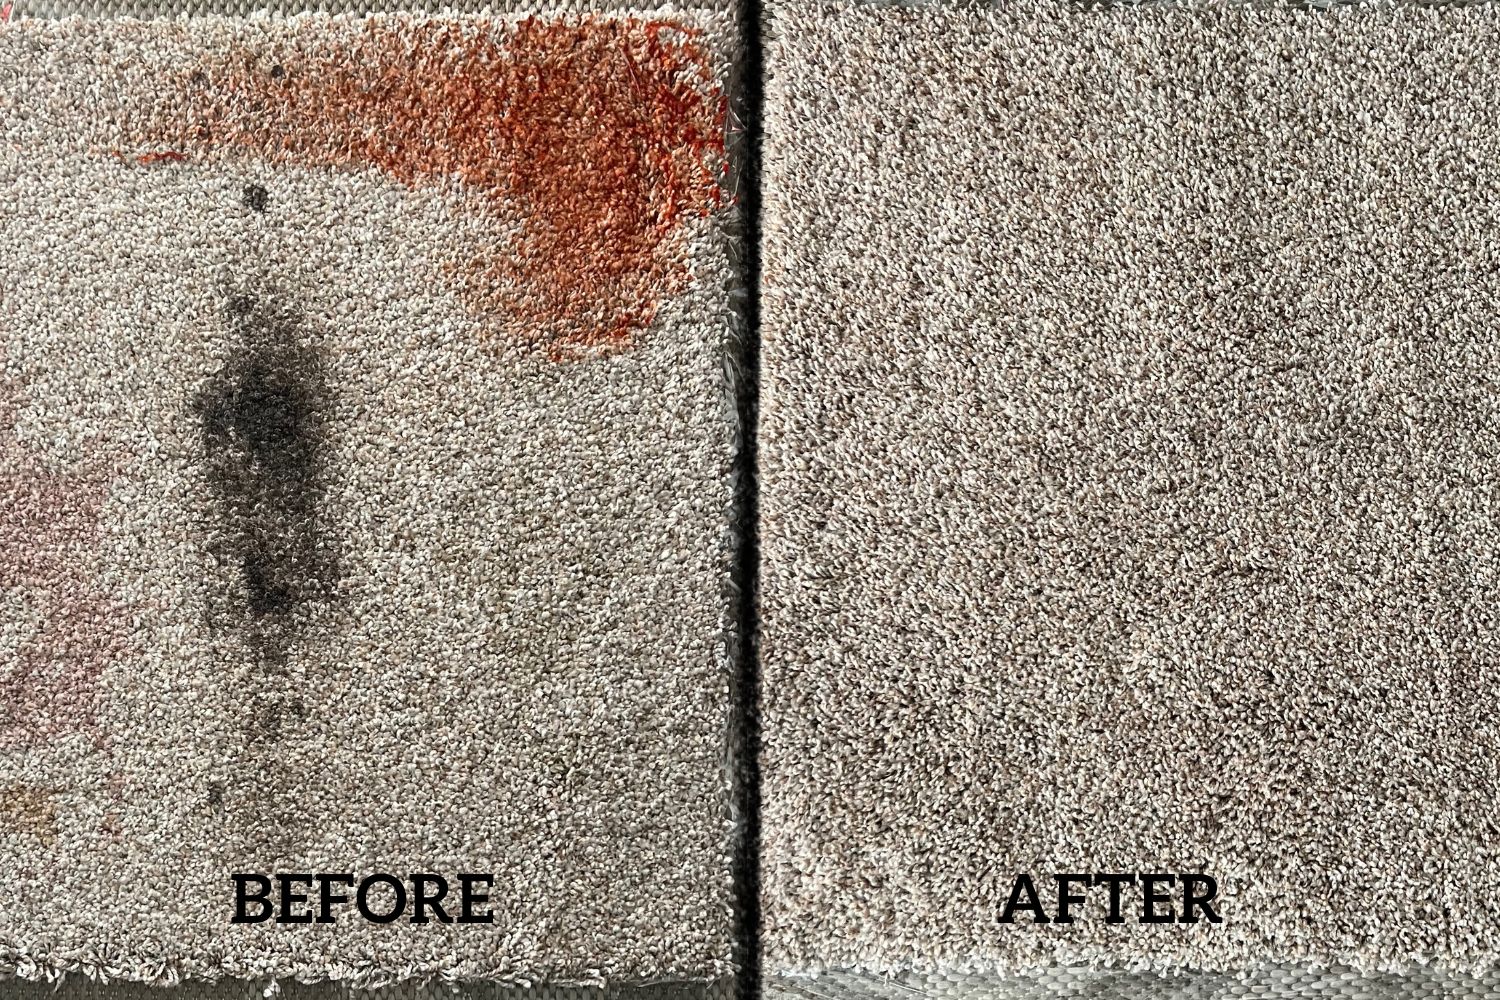 Side by side before and after photos of stained carpet and cleaned carpet